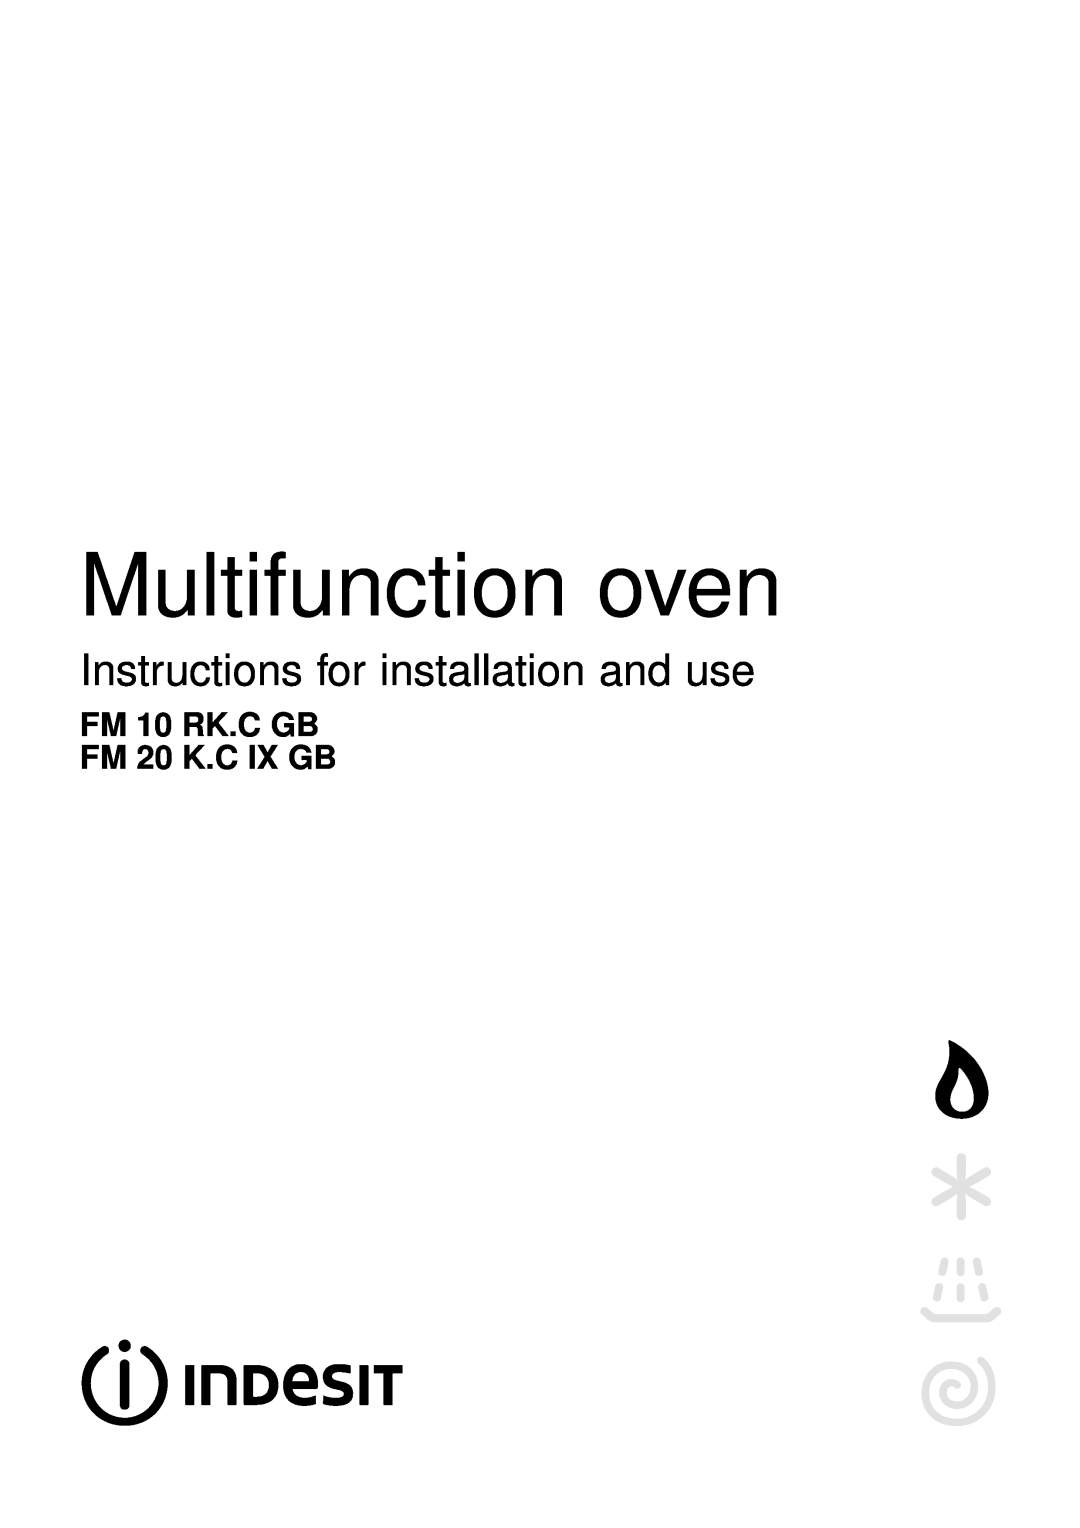 Indesit manual Multifunction oven, Instructions for installation and use, FM 10 RK.C GB FM 20 K.C IX GB 